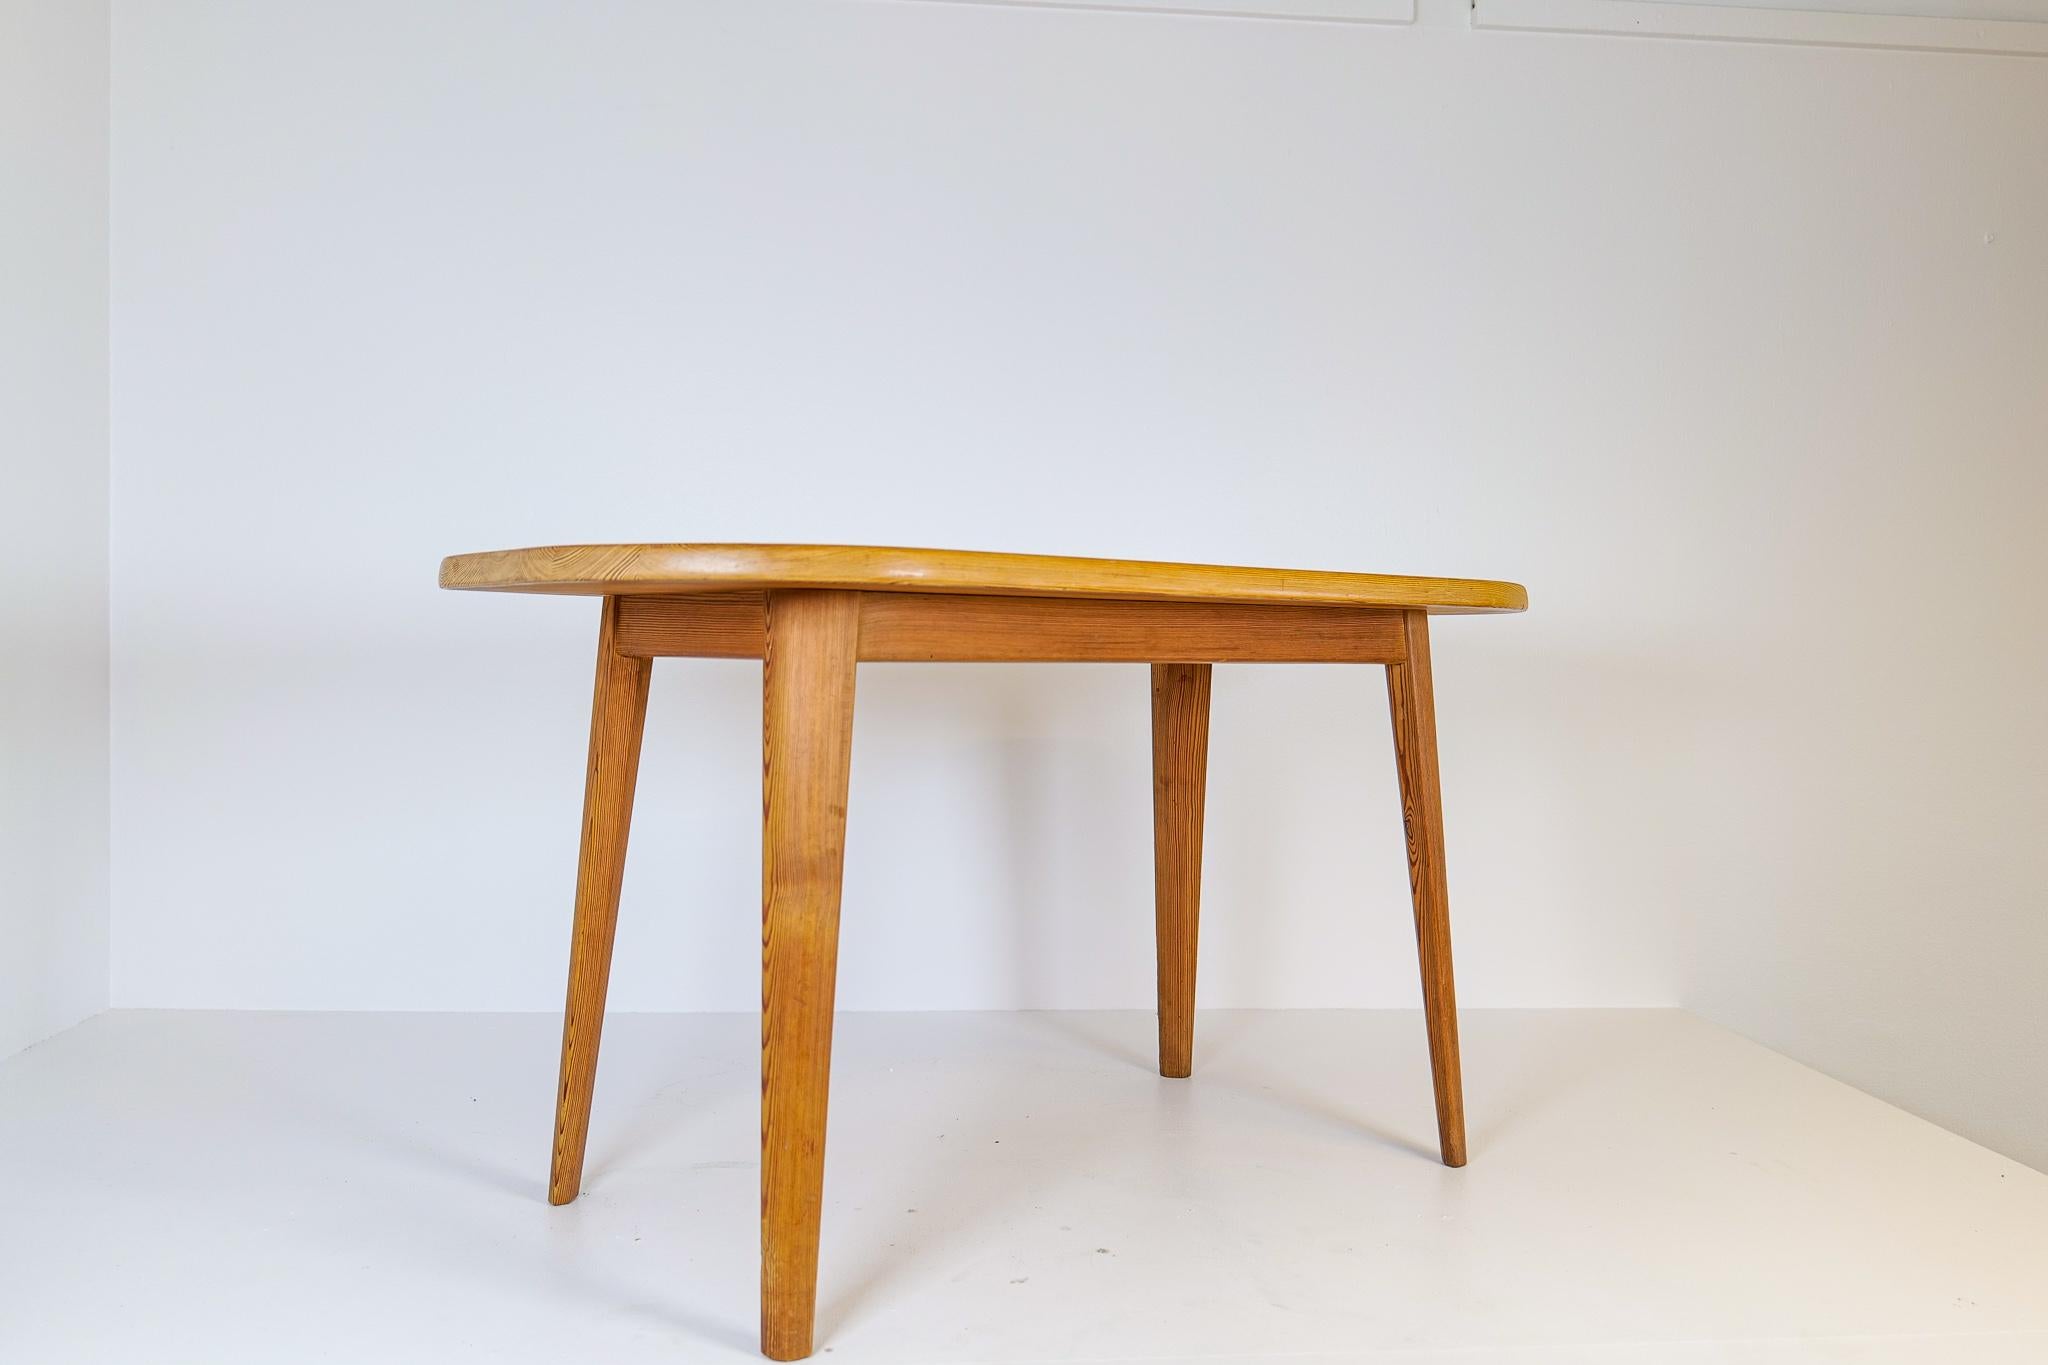 Wonderful pine coffetable by Swedish designer Carl Malmsten. The table is produced in the time when the pine furniture of quality were made in Sweden. This one is no exaption. 

The table is in good vintage condition with some marks on the legs